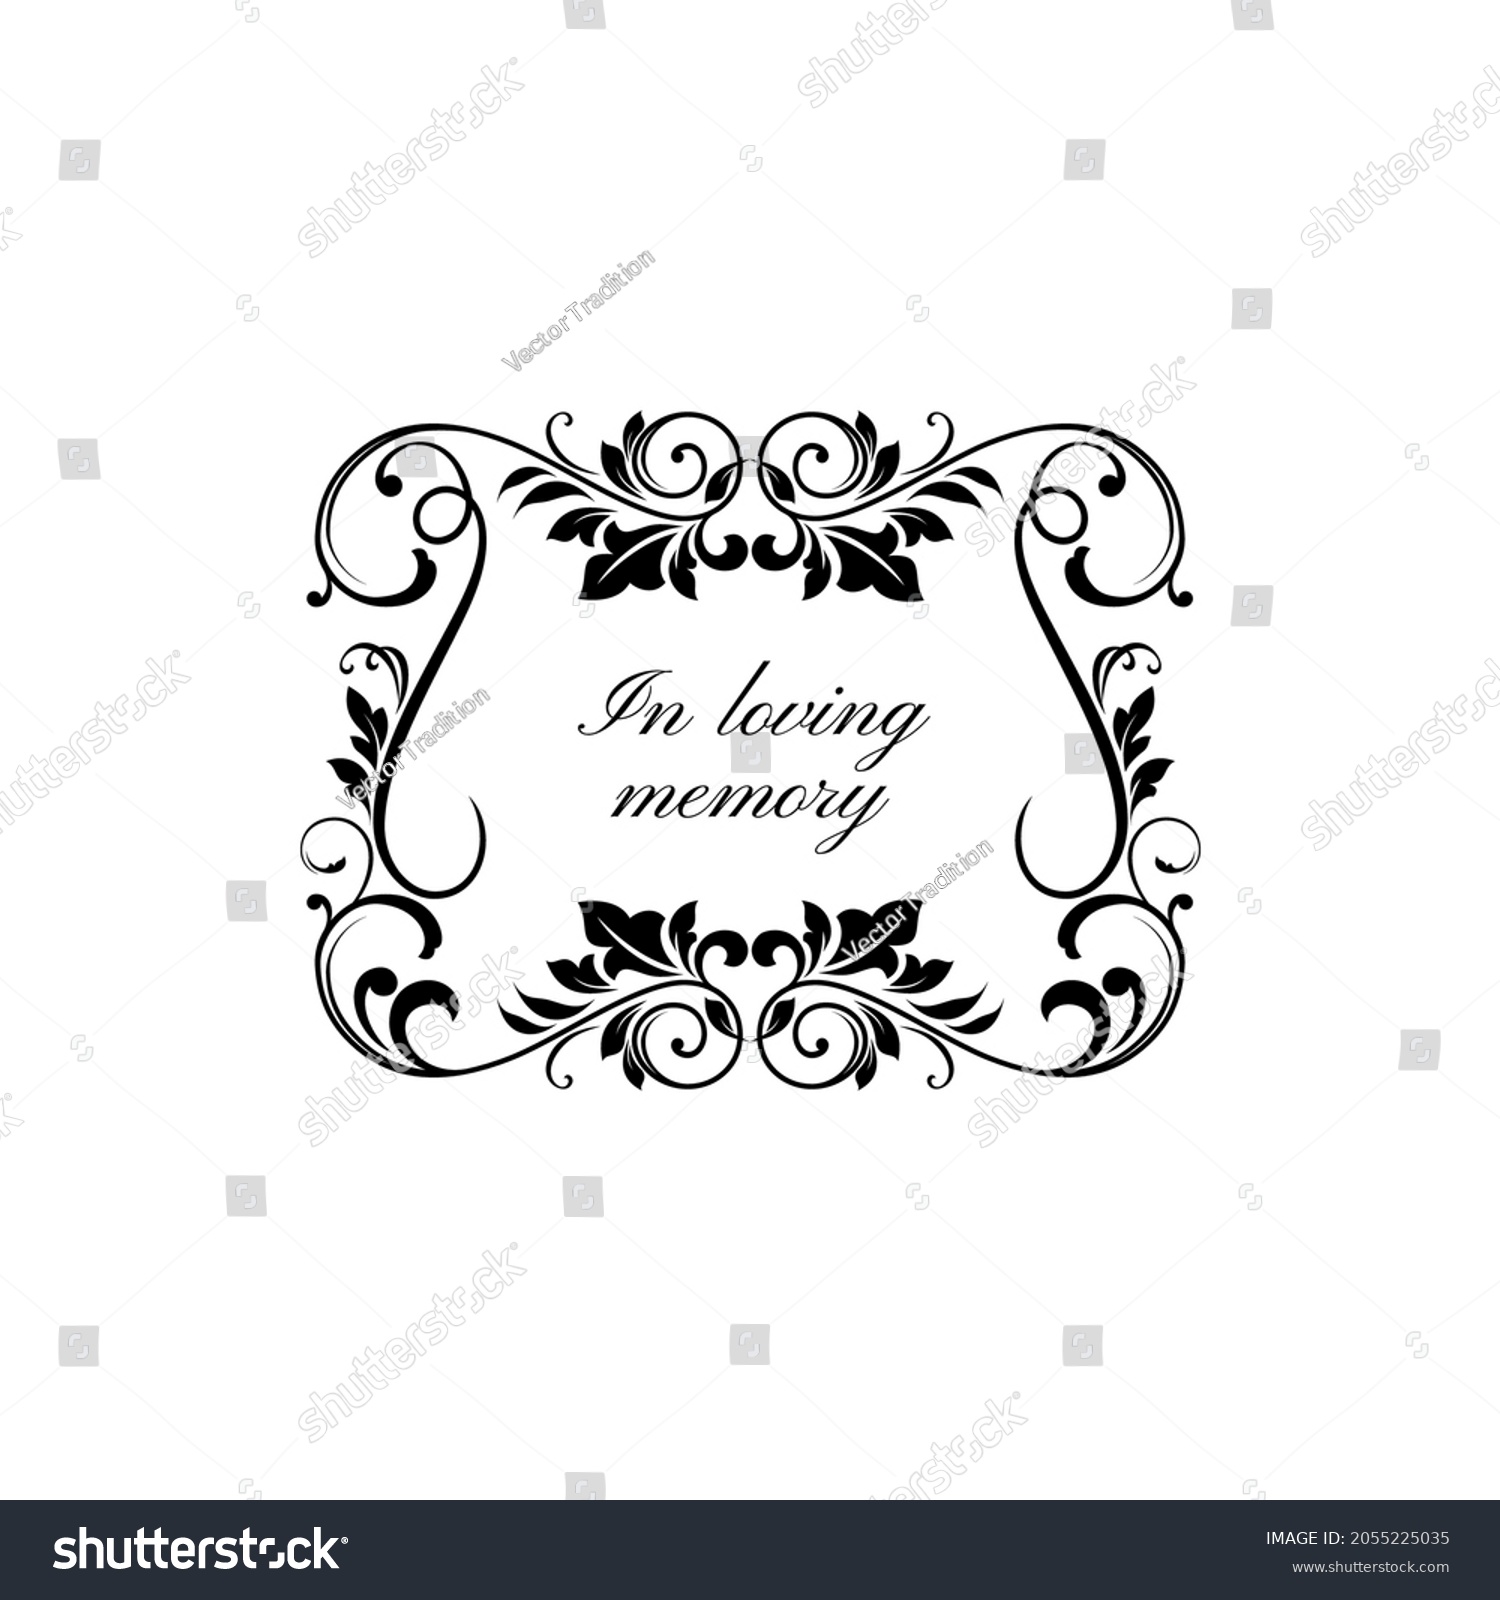 SVG of In loving memory floral ornament on gravestone isolated monochrome frame. Vector condolence message on tomb stone with vintage flower ornaments and leaves, ornate obsequies template, bereavement svg